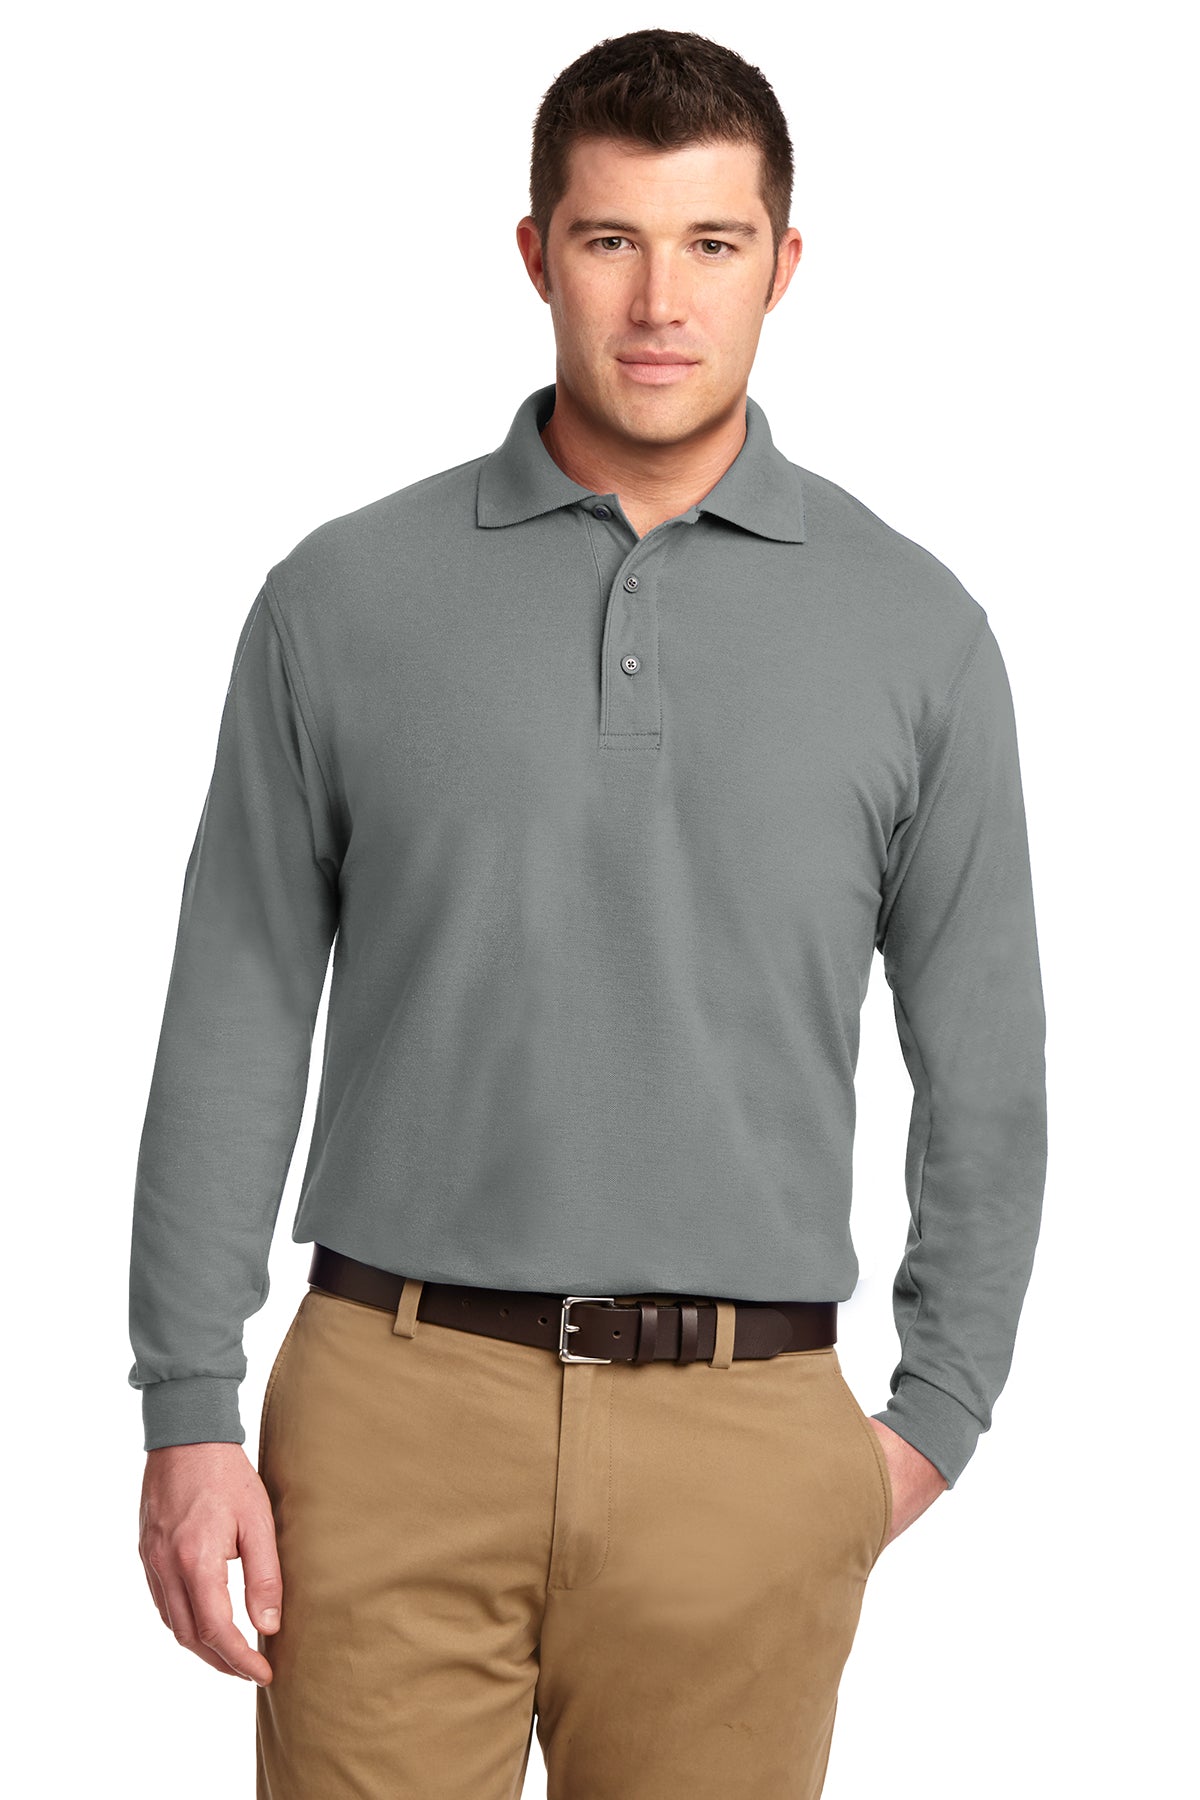 Windsor - ADULT Long Sleeve Polo - COOL GREY (K500LS) - Southern Grace Creations